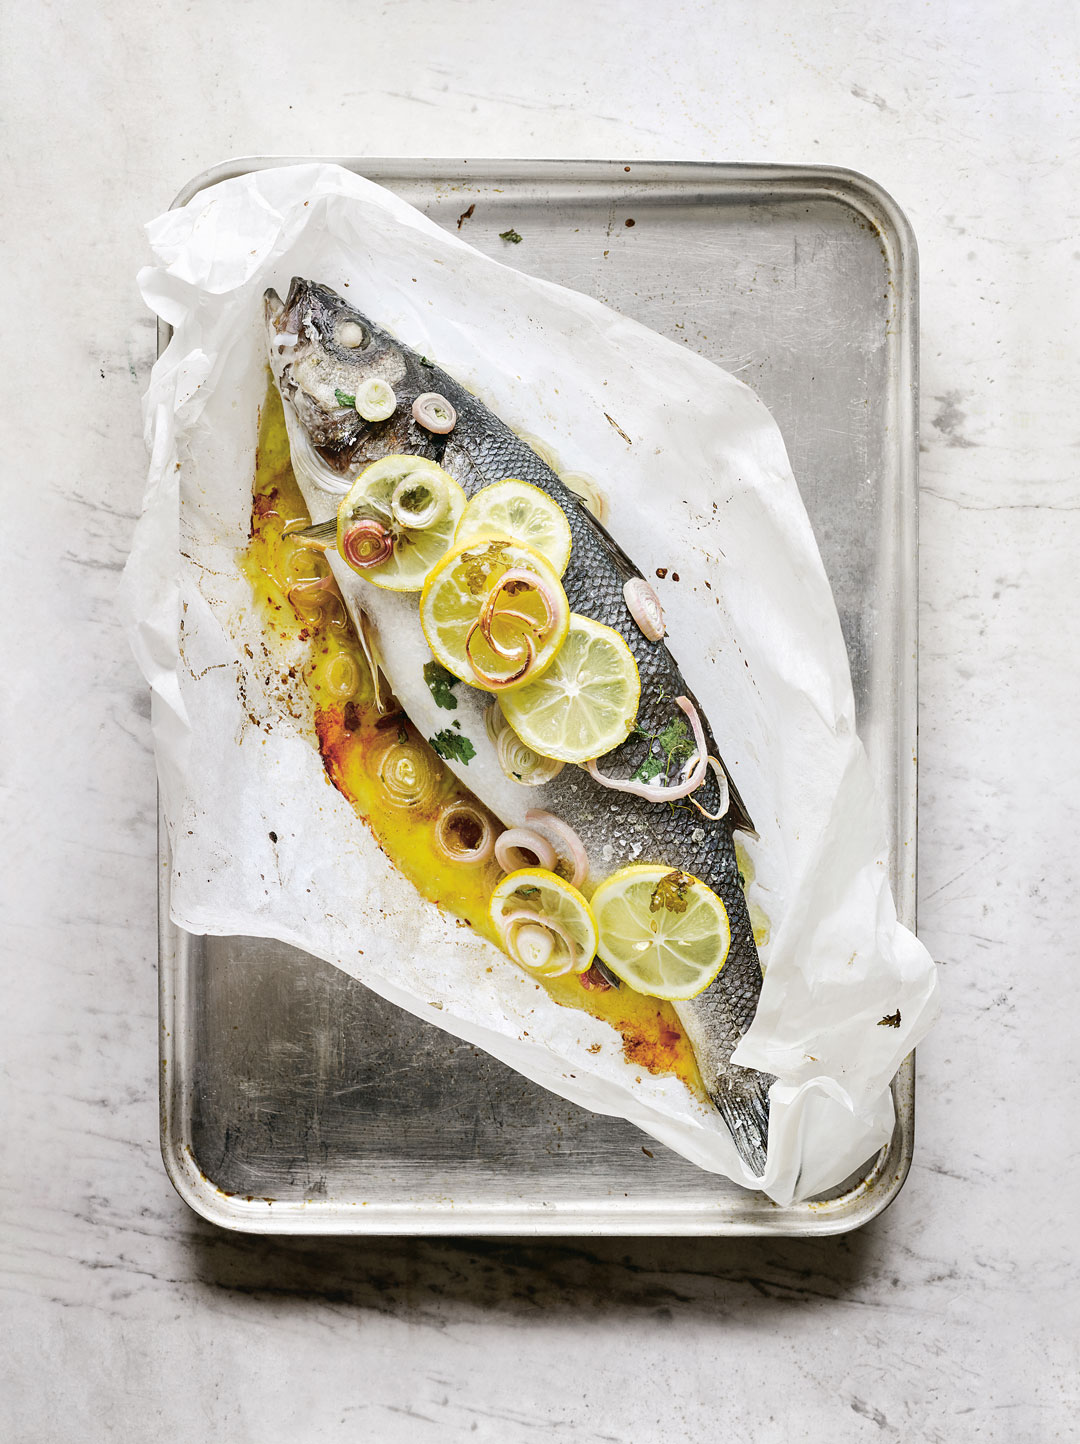 Sea bass baked in a parcel. All images from The Silver Spoon Classic